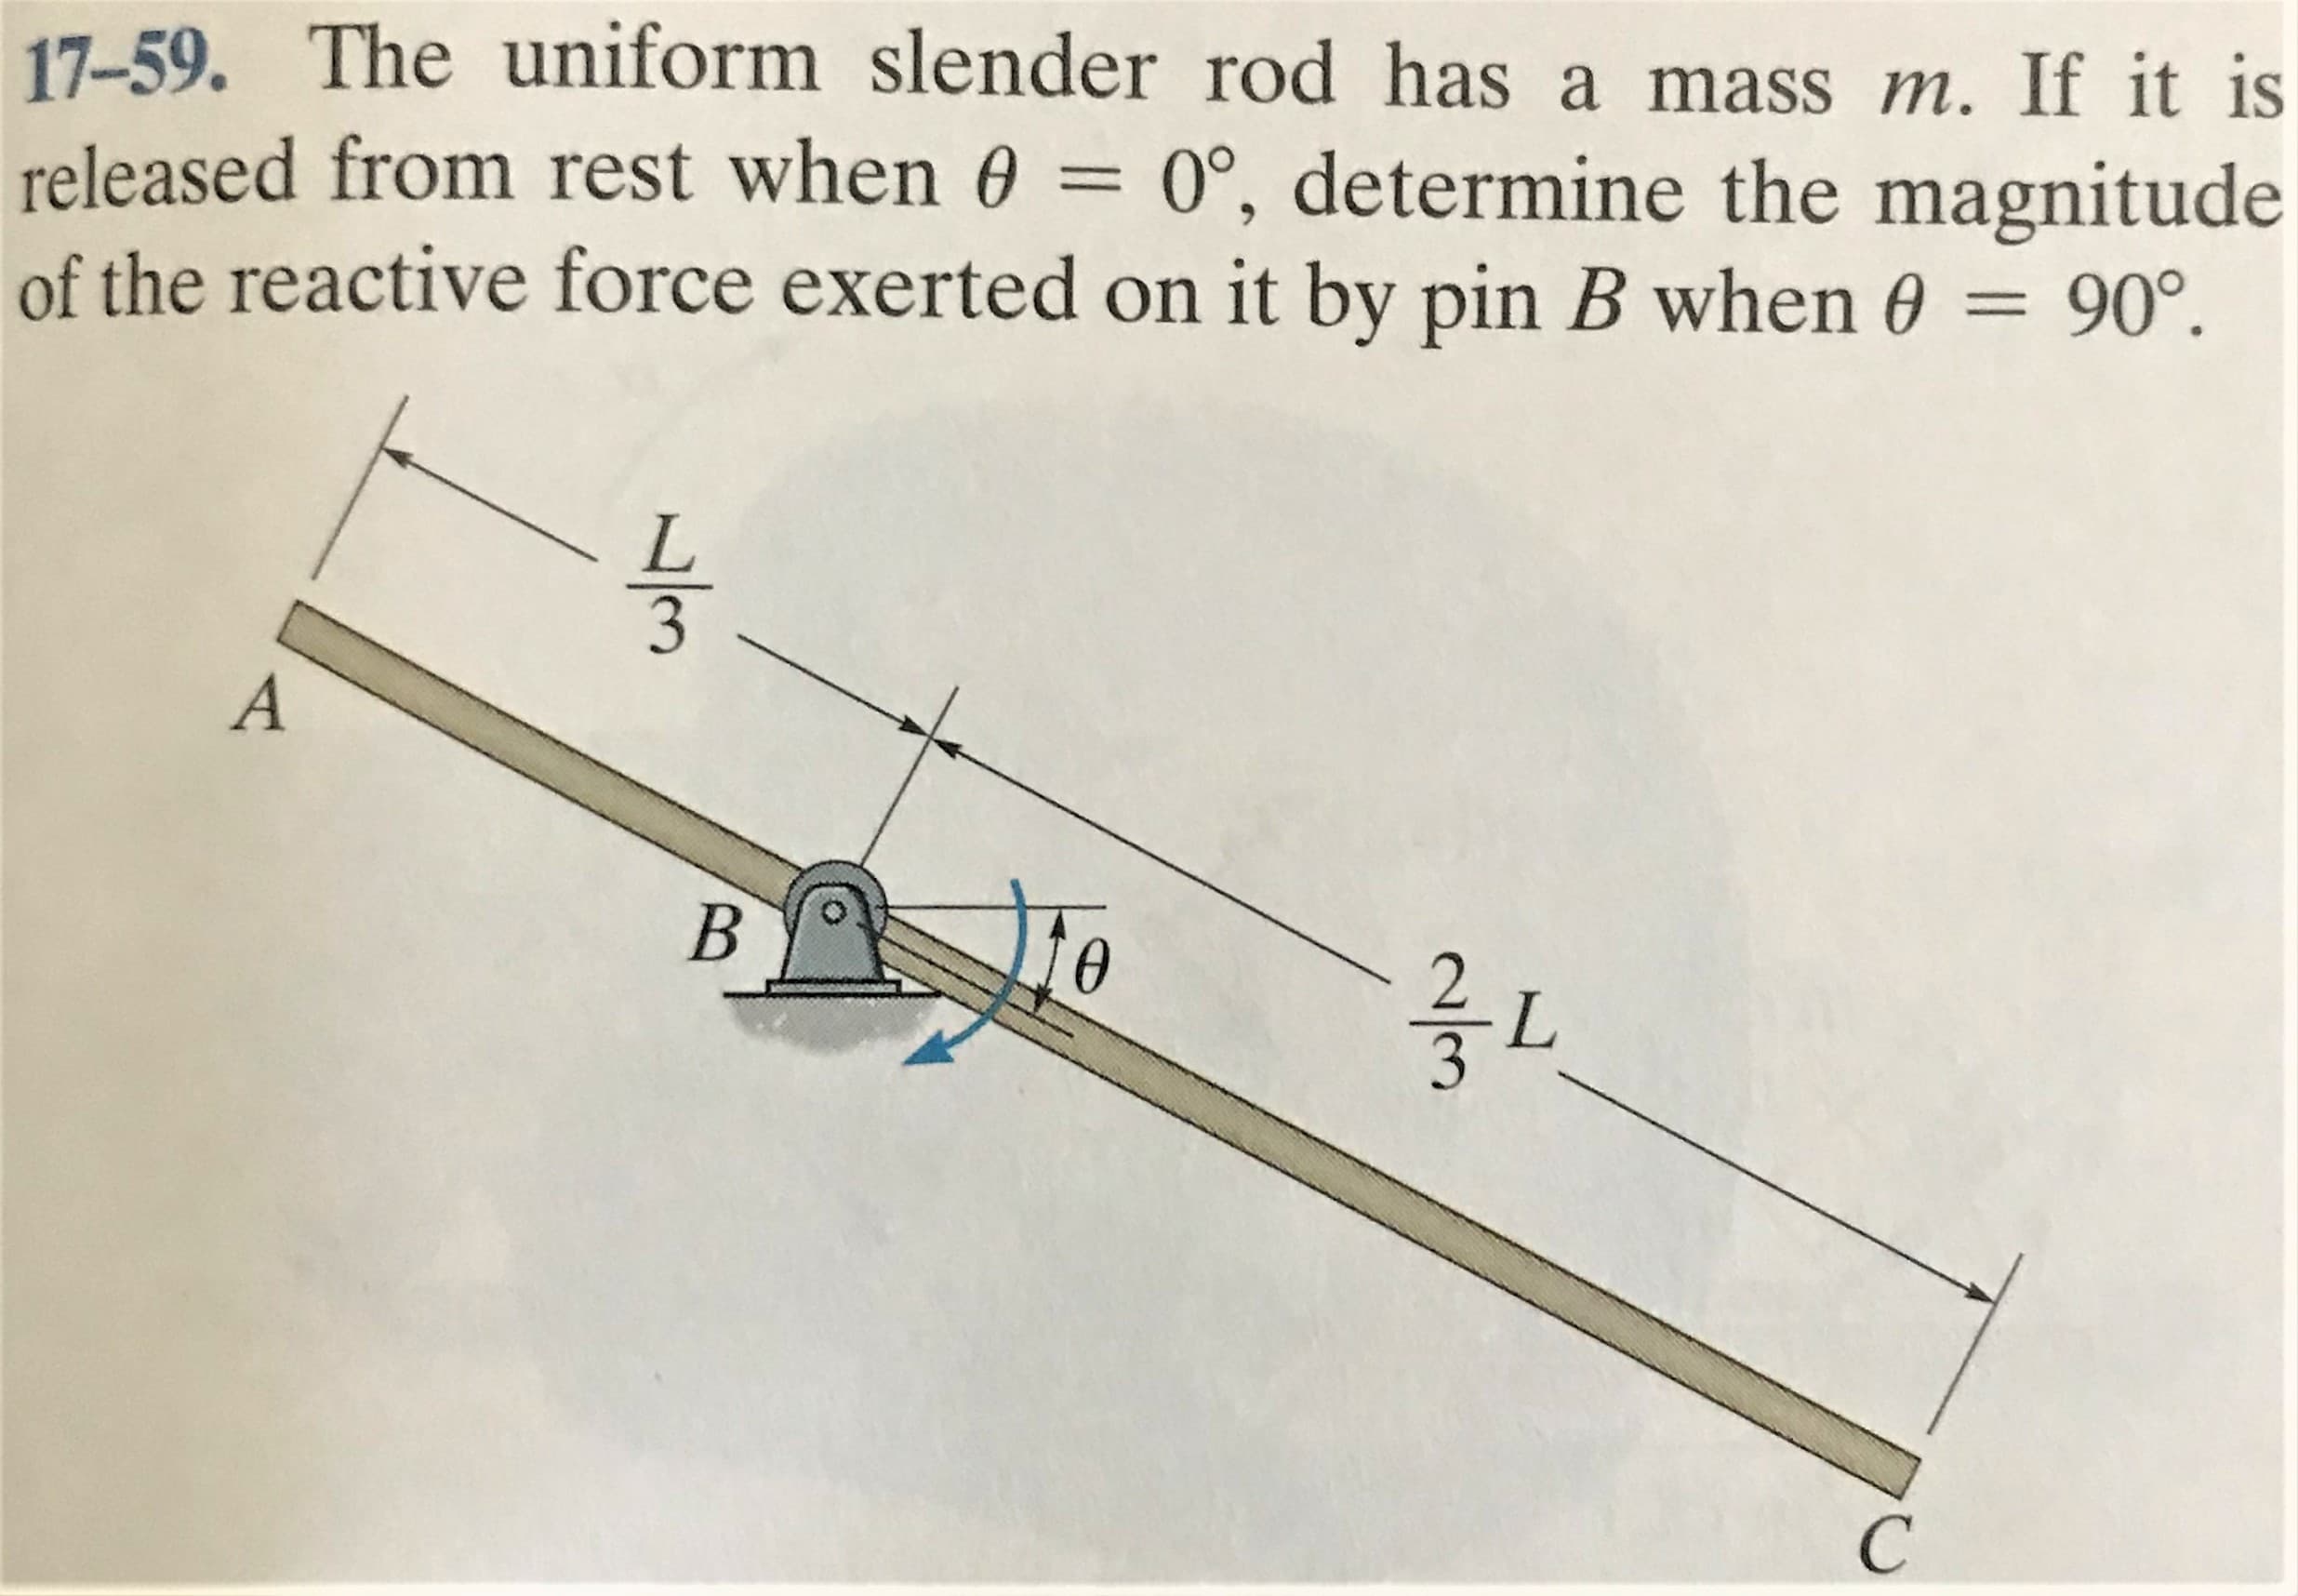 17-59. The uniform slender rod has a mass m. If it is
released from rest when 0 = 0°, determine the magnitude
of the reactive force exerted on it by pin B when 0 = 90°.
A
L.
2/3
1/3
